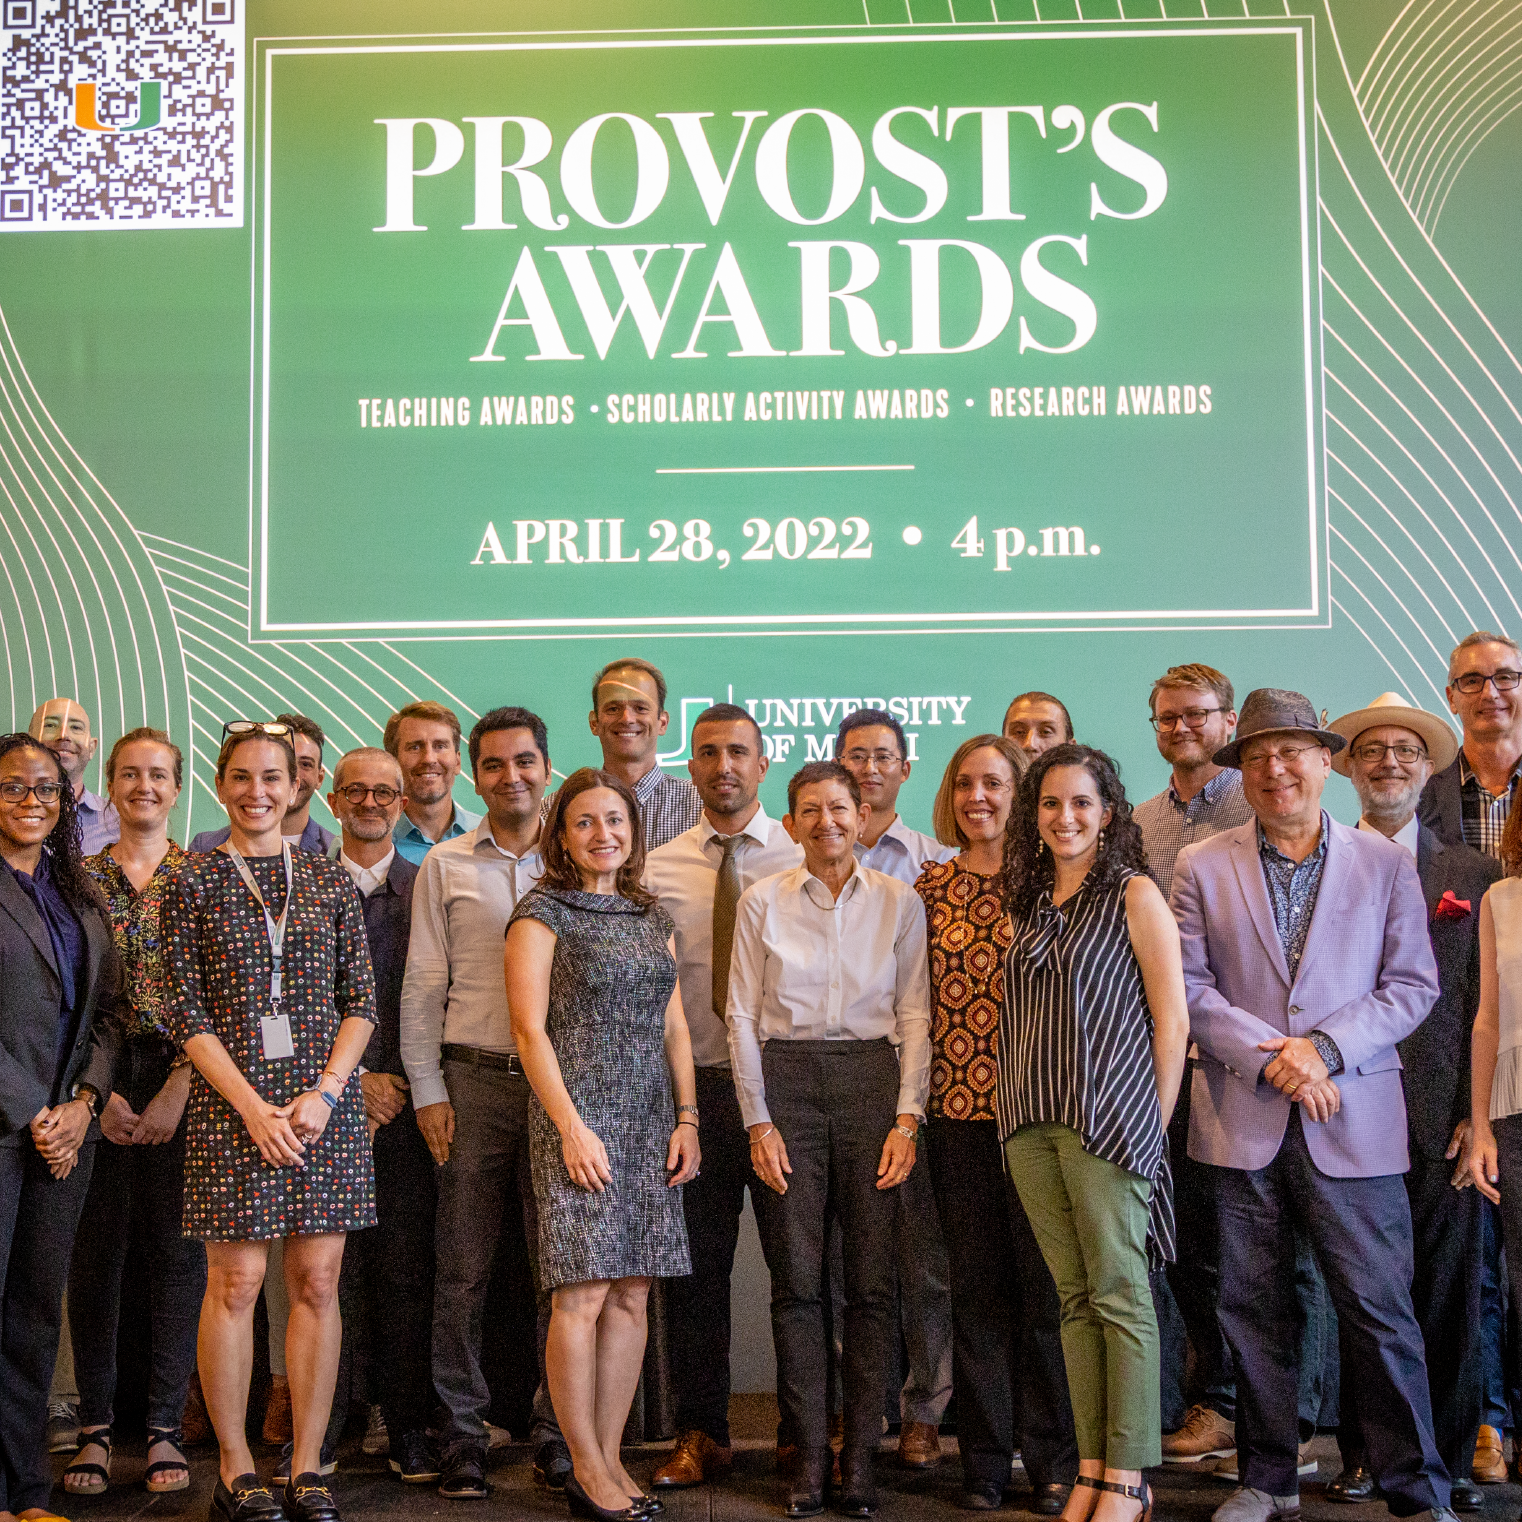 Provost’s Awards honor research, scholarship